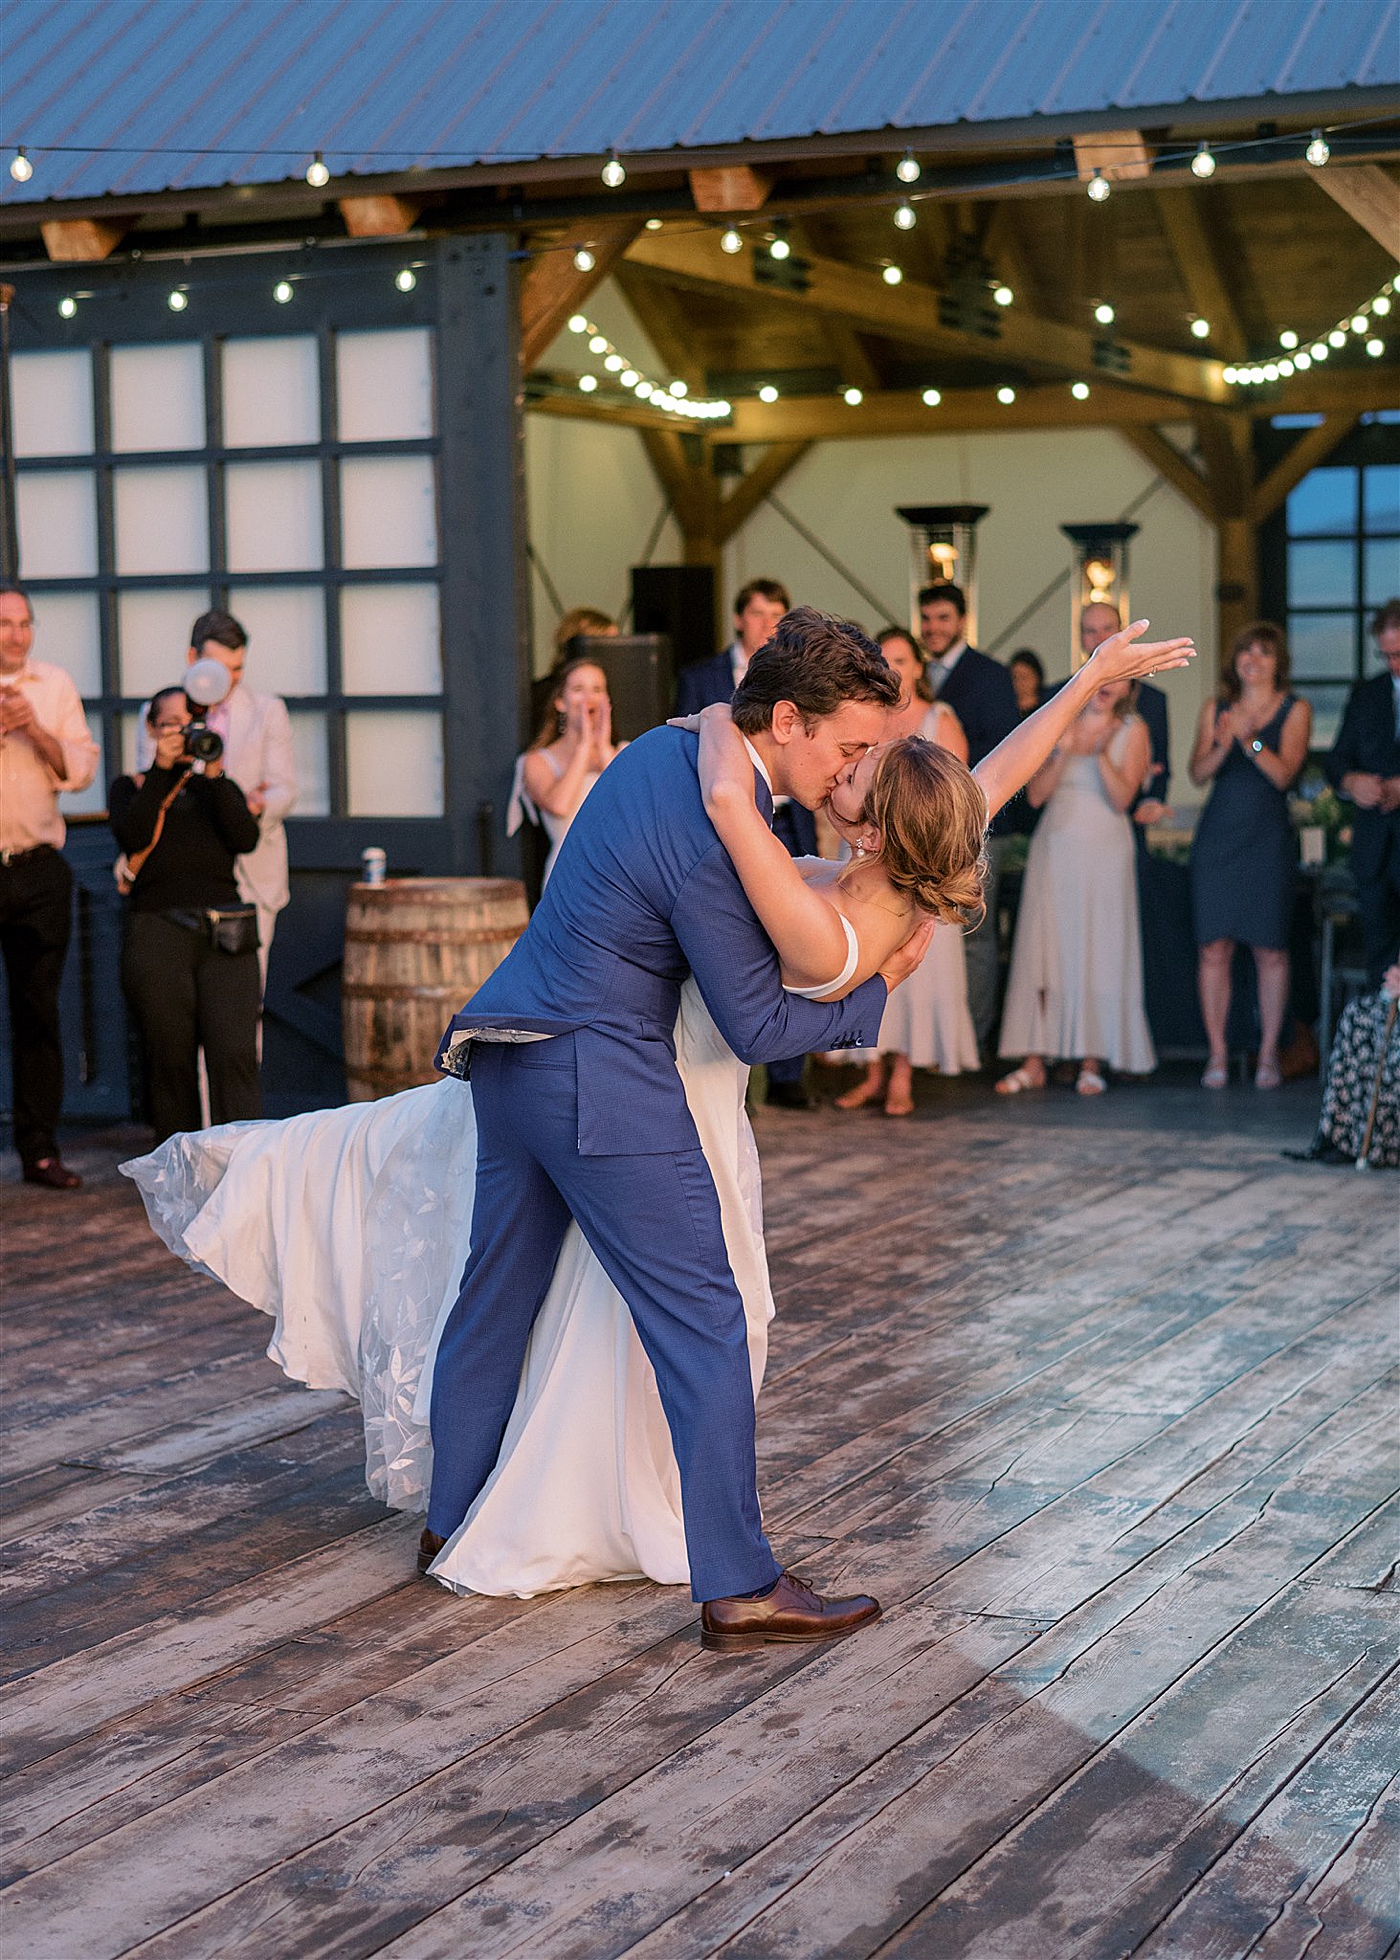 Groom dipping bride during first dance | McArthur Weddings and Events